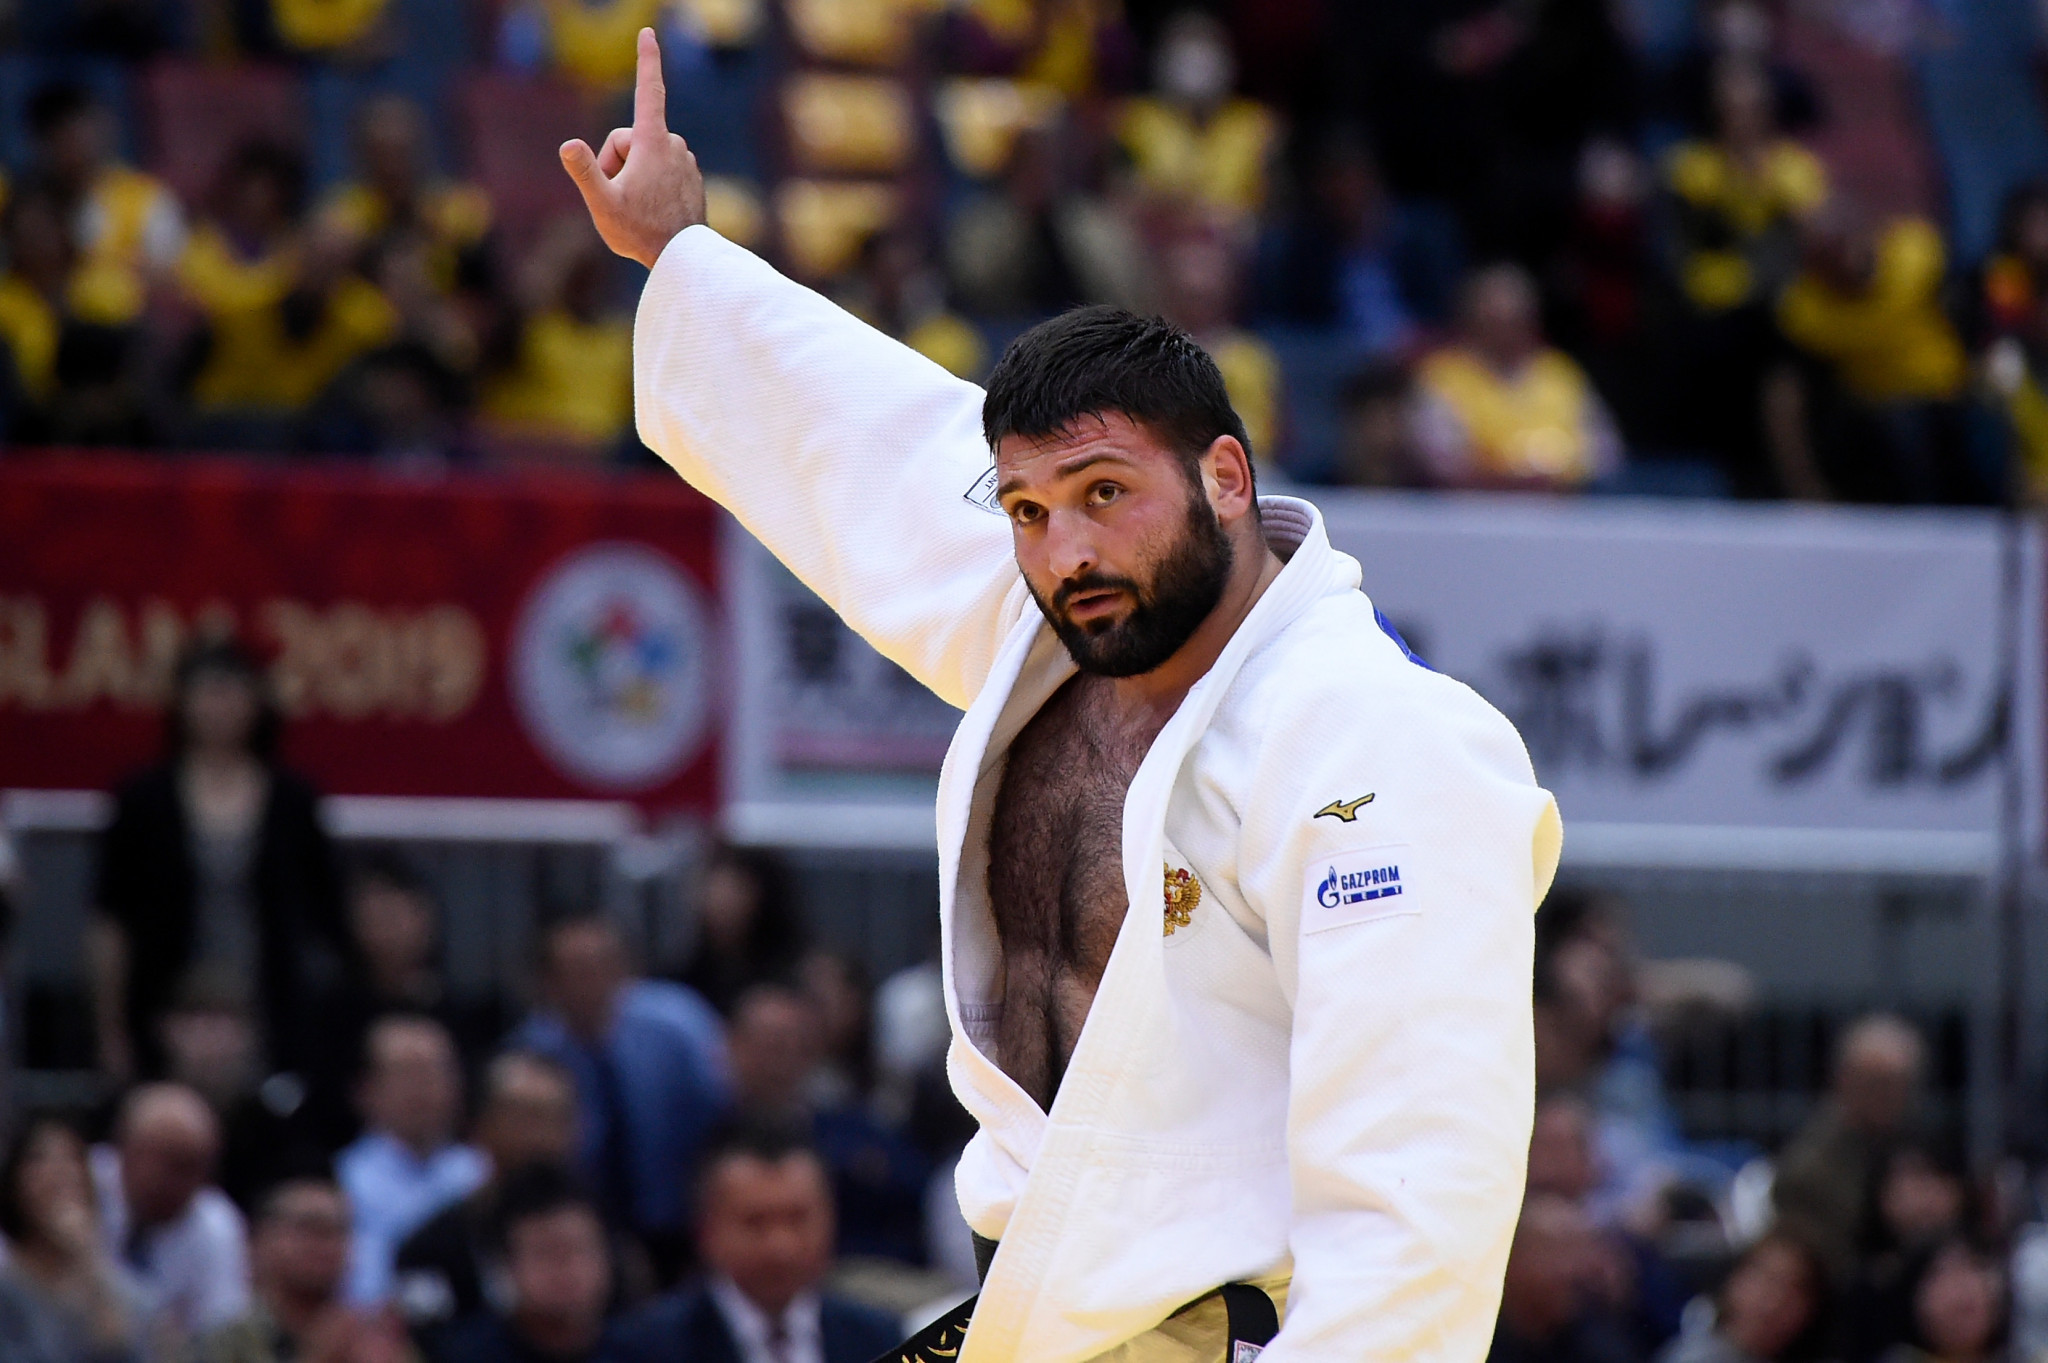 Russian athletes win two golds as neutrals on final day of IJF Grand Slam in Baku